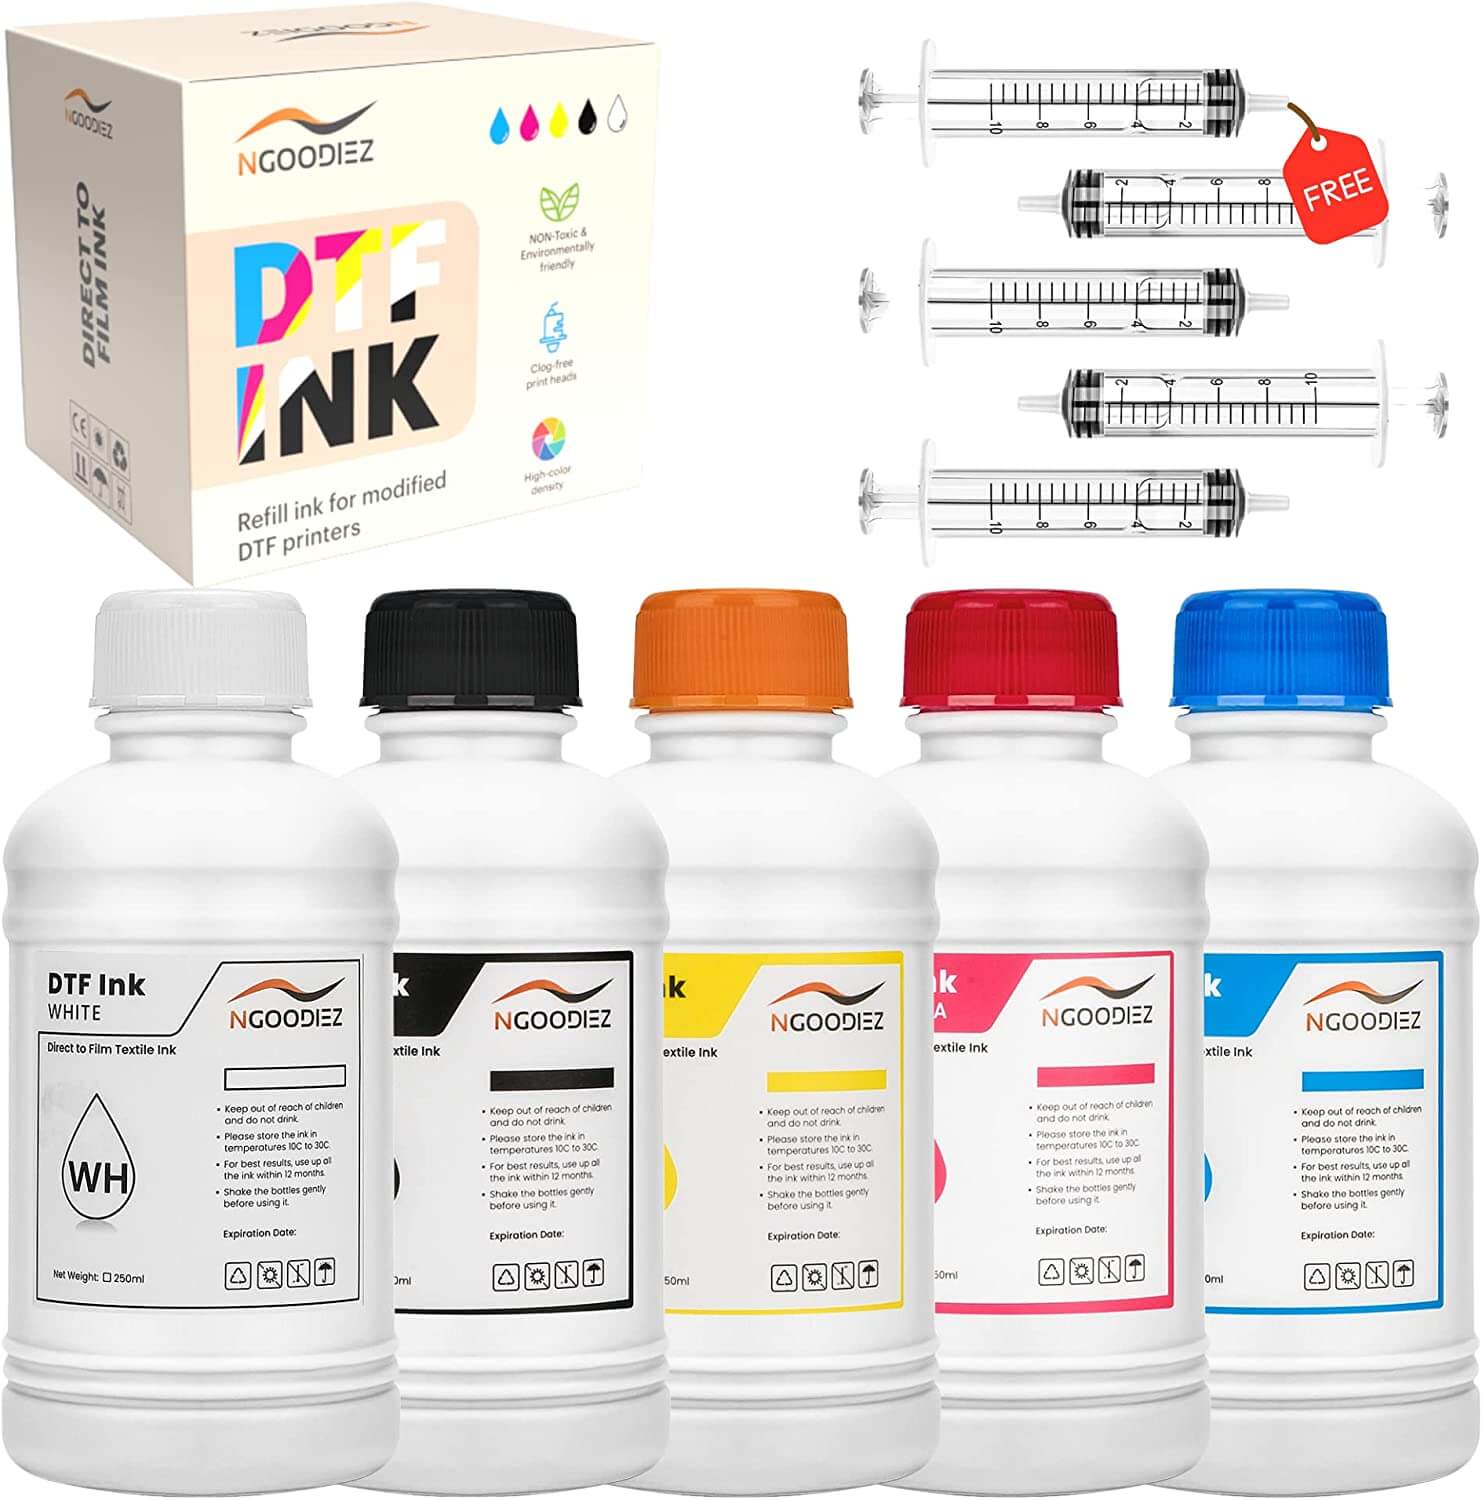 DTF Ink (250ml) - NGOODIEZ